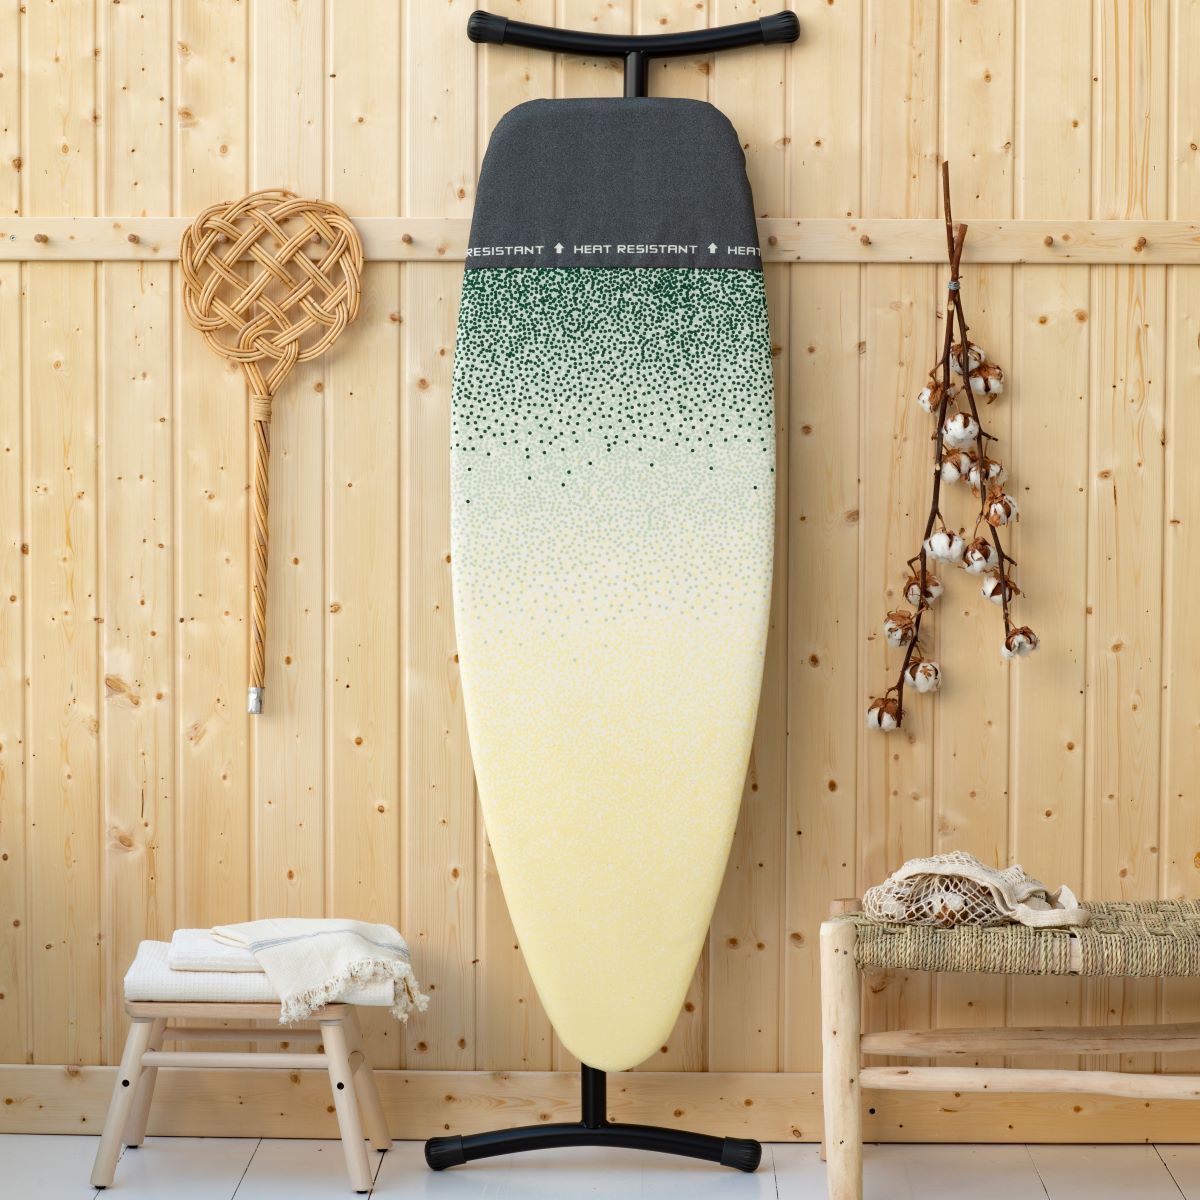 The "New Dawn" ironing board cover from Brabantia is made with Fairtrade cotton